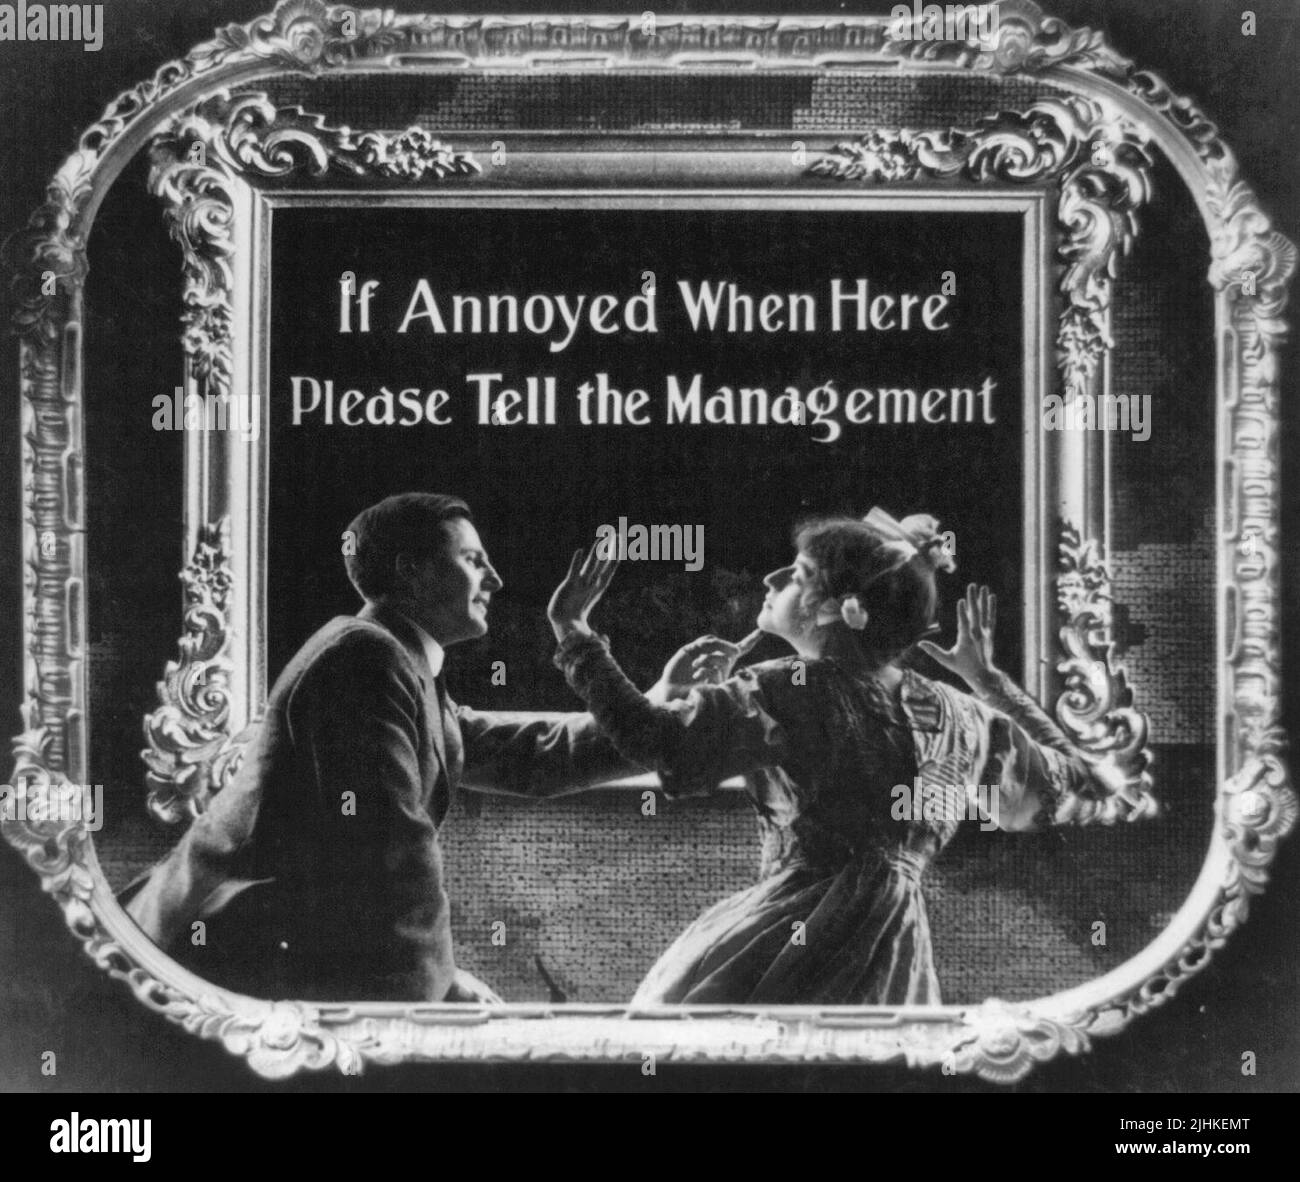 If annoyed when here, please tell the management. Positive paper print from lantern slide used in motion picture theaters as announcement. Stock Photo